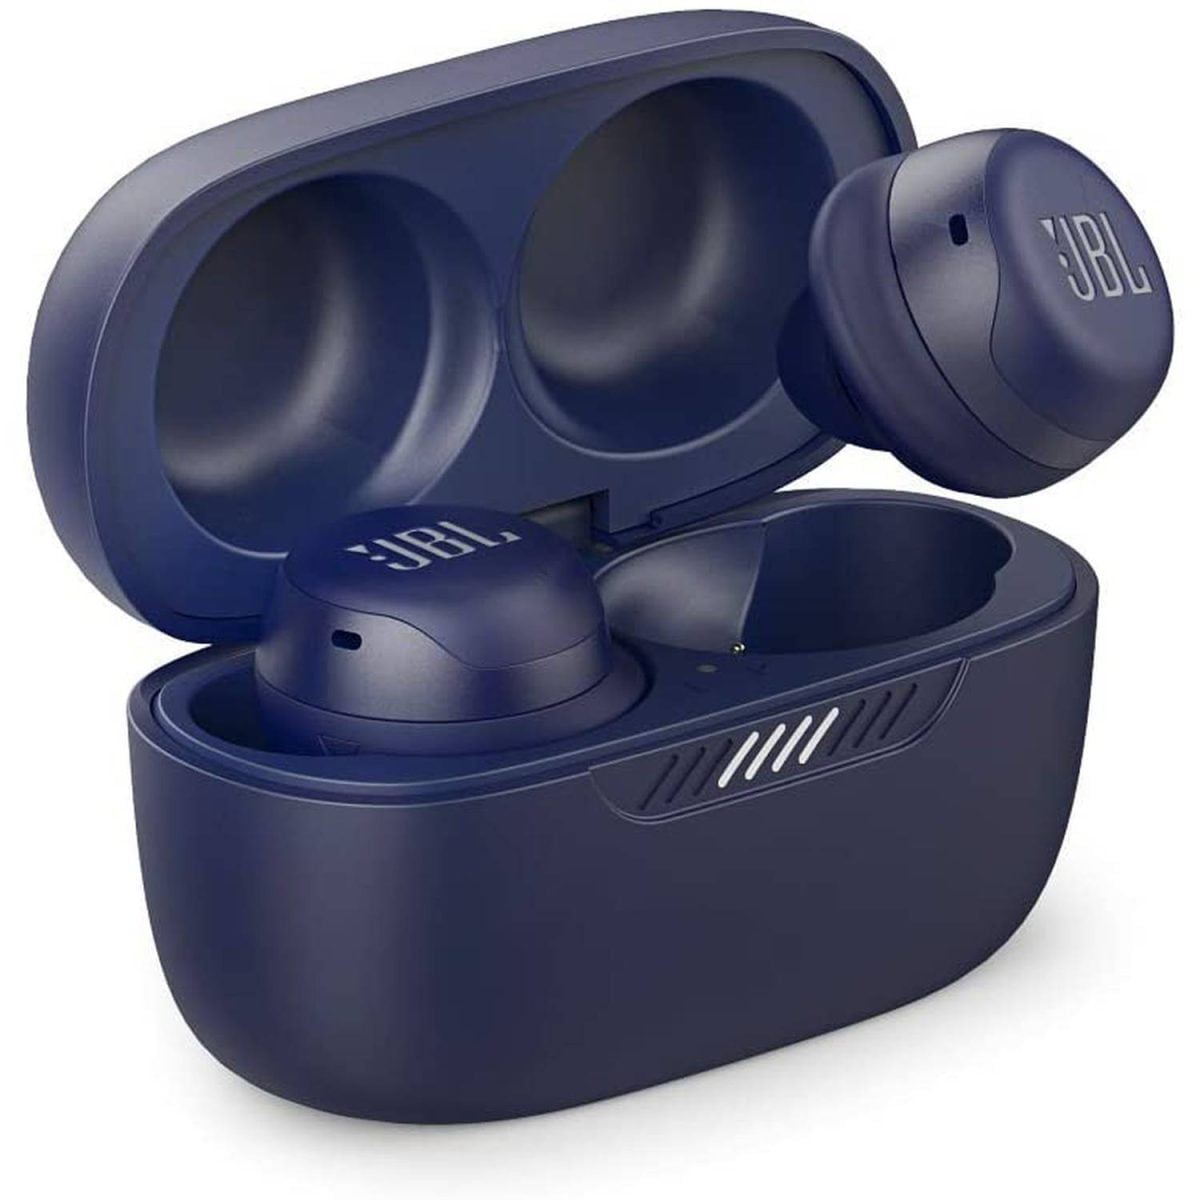 61Ogbywjhvl. Ac Sl1500 Smart Crop C0 5 0 5 1500X1500 70 Jbl &Lt;H1&Gt;Jbl Live Free Nc+Tws True Wireless Noise Cancelling Earbuds-Blue&Lt;/H1&Gt; Https://Www.youtube.com/Watch?V=0Qcsos4Yngw Take On The World, With Style. Jbl Live Free Nc+ Tws Earbuds Deliver Jbl Signature Sound With Supreme Comfort. Stay In The Groove All Day Long Without Noise Or Any Distractions Thanks To Active Noise Cancelling, While Talkthru And Ambient Aware Keep You In Touch With Your Friends And Surroundings. Up To 21 Hours Of Battery Life. Jbl Live Jbl Live Free Nc+Tws True Wireless Noise Cancelling Earbuds-Blue